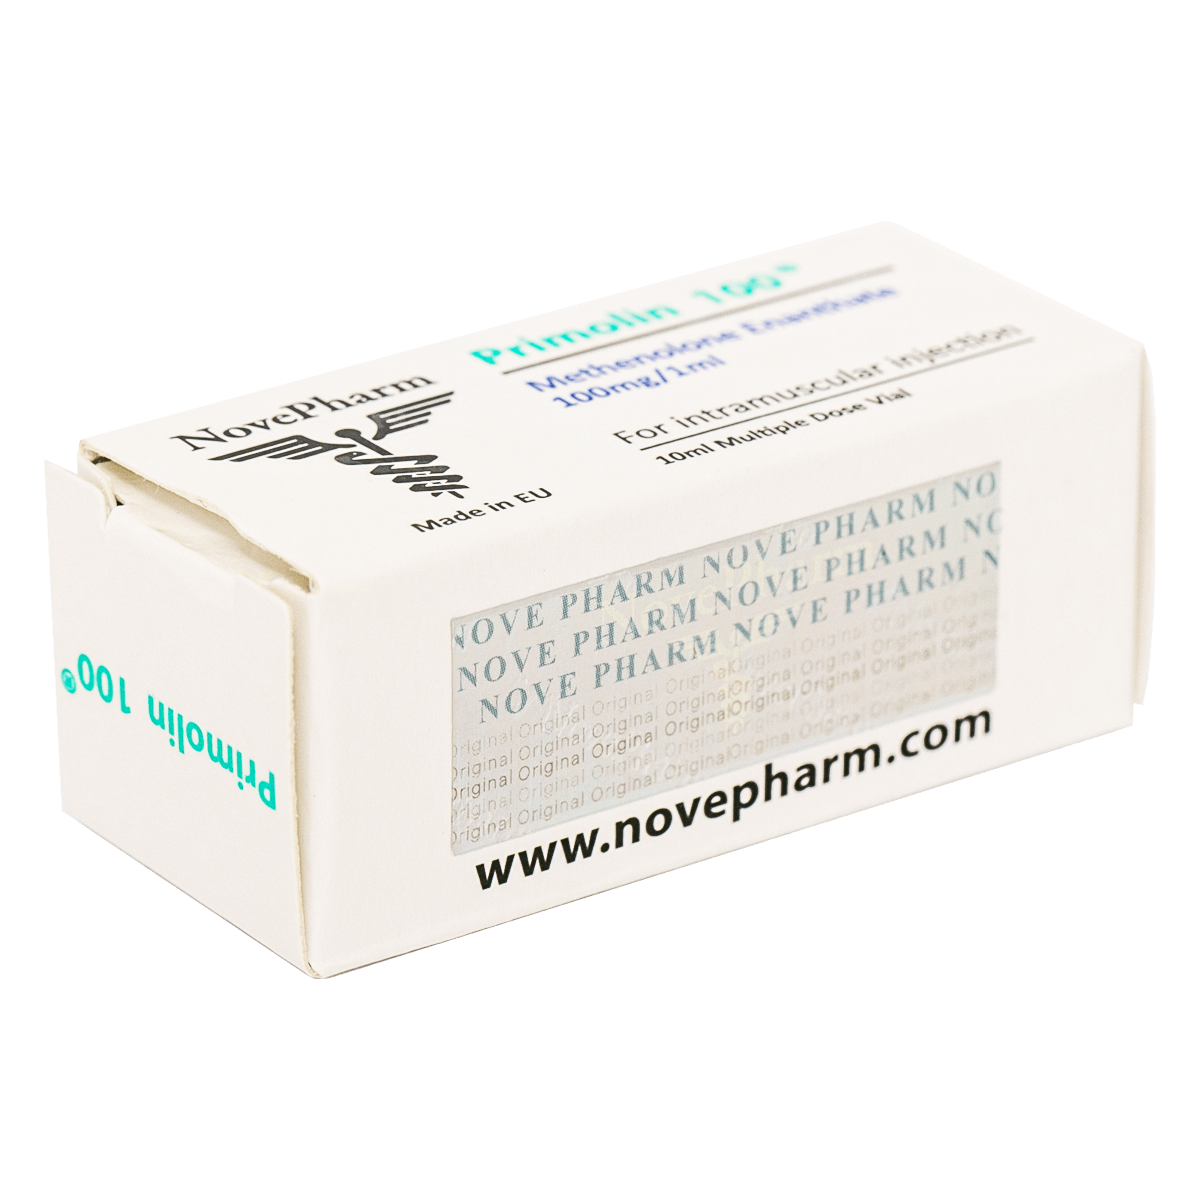 Nove_Pharm_Primabolan_Methenolone_Enanthate_Injectable_Steroids_Burn_Fats_Lose_Weight_Muscle_Gain_Strength_quality_muscle_hunter_xsf_group